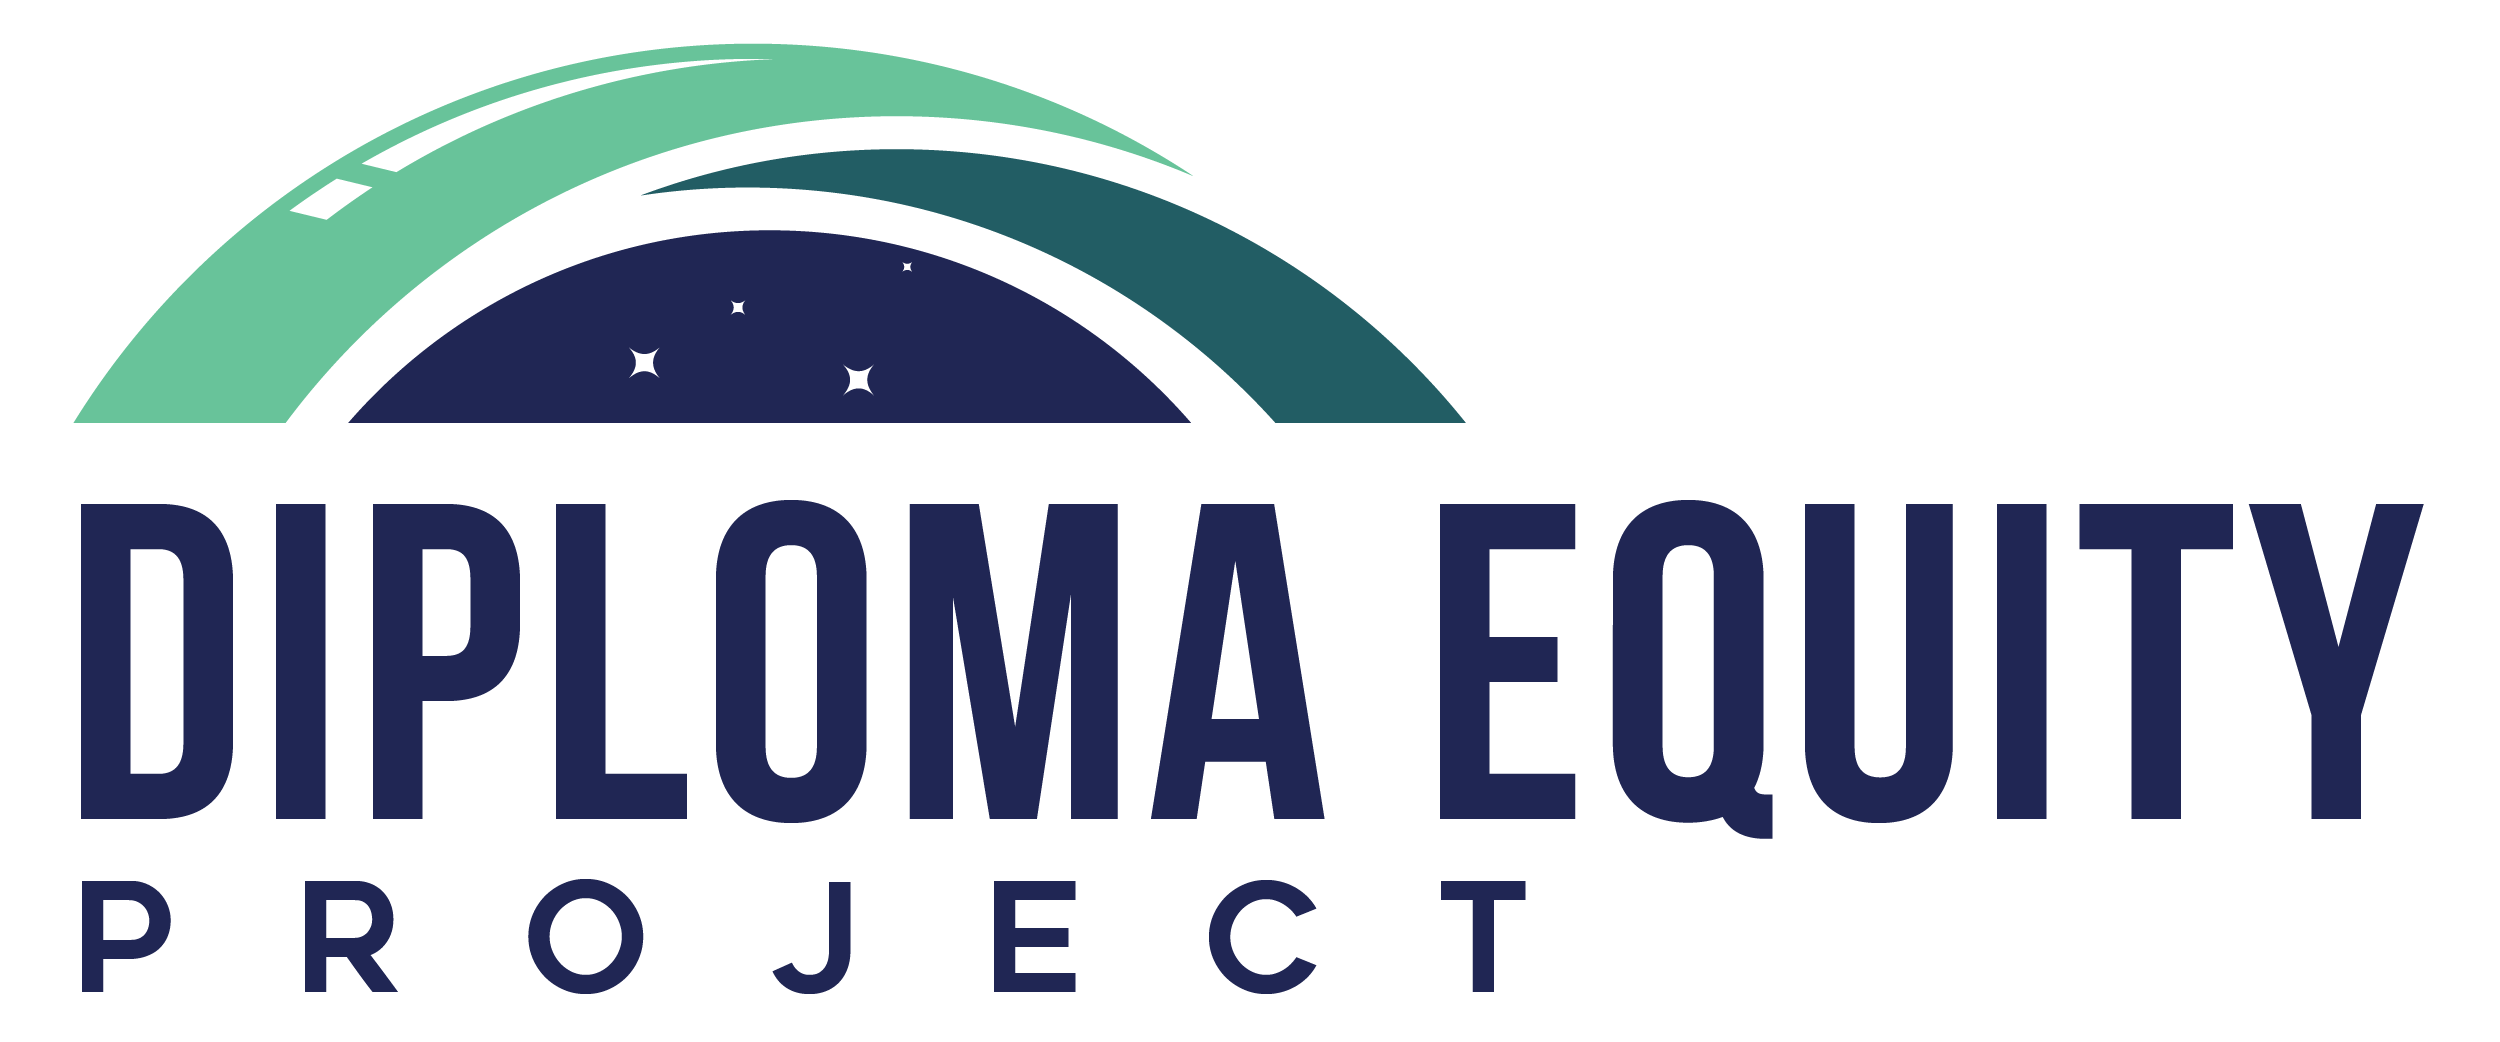 Diploma Equity Project